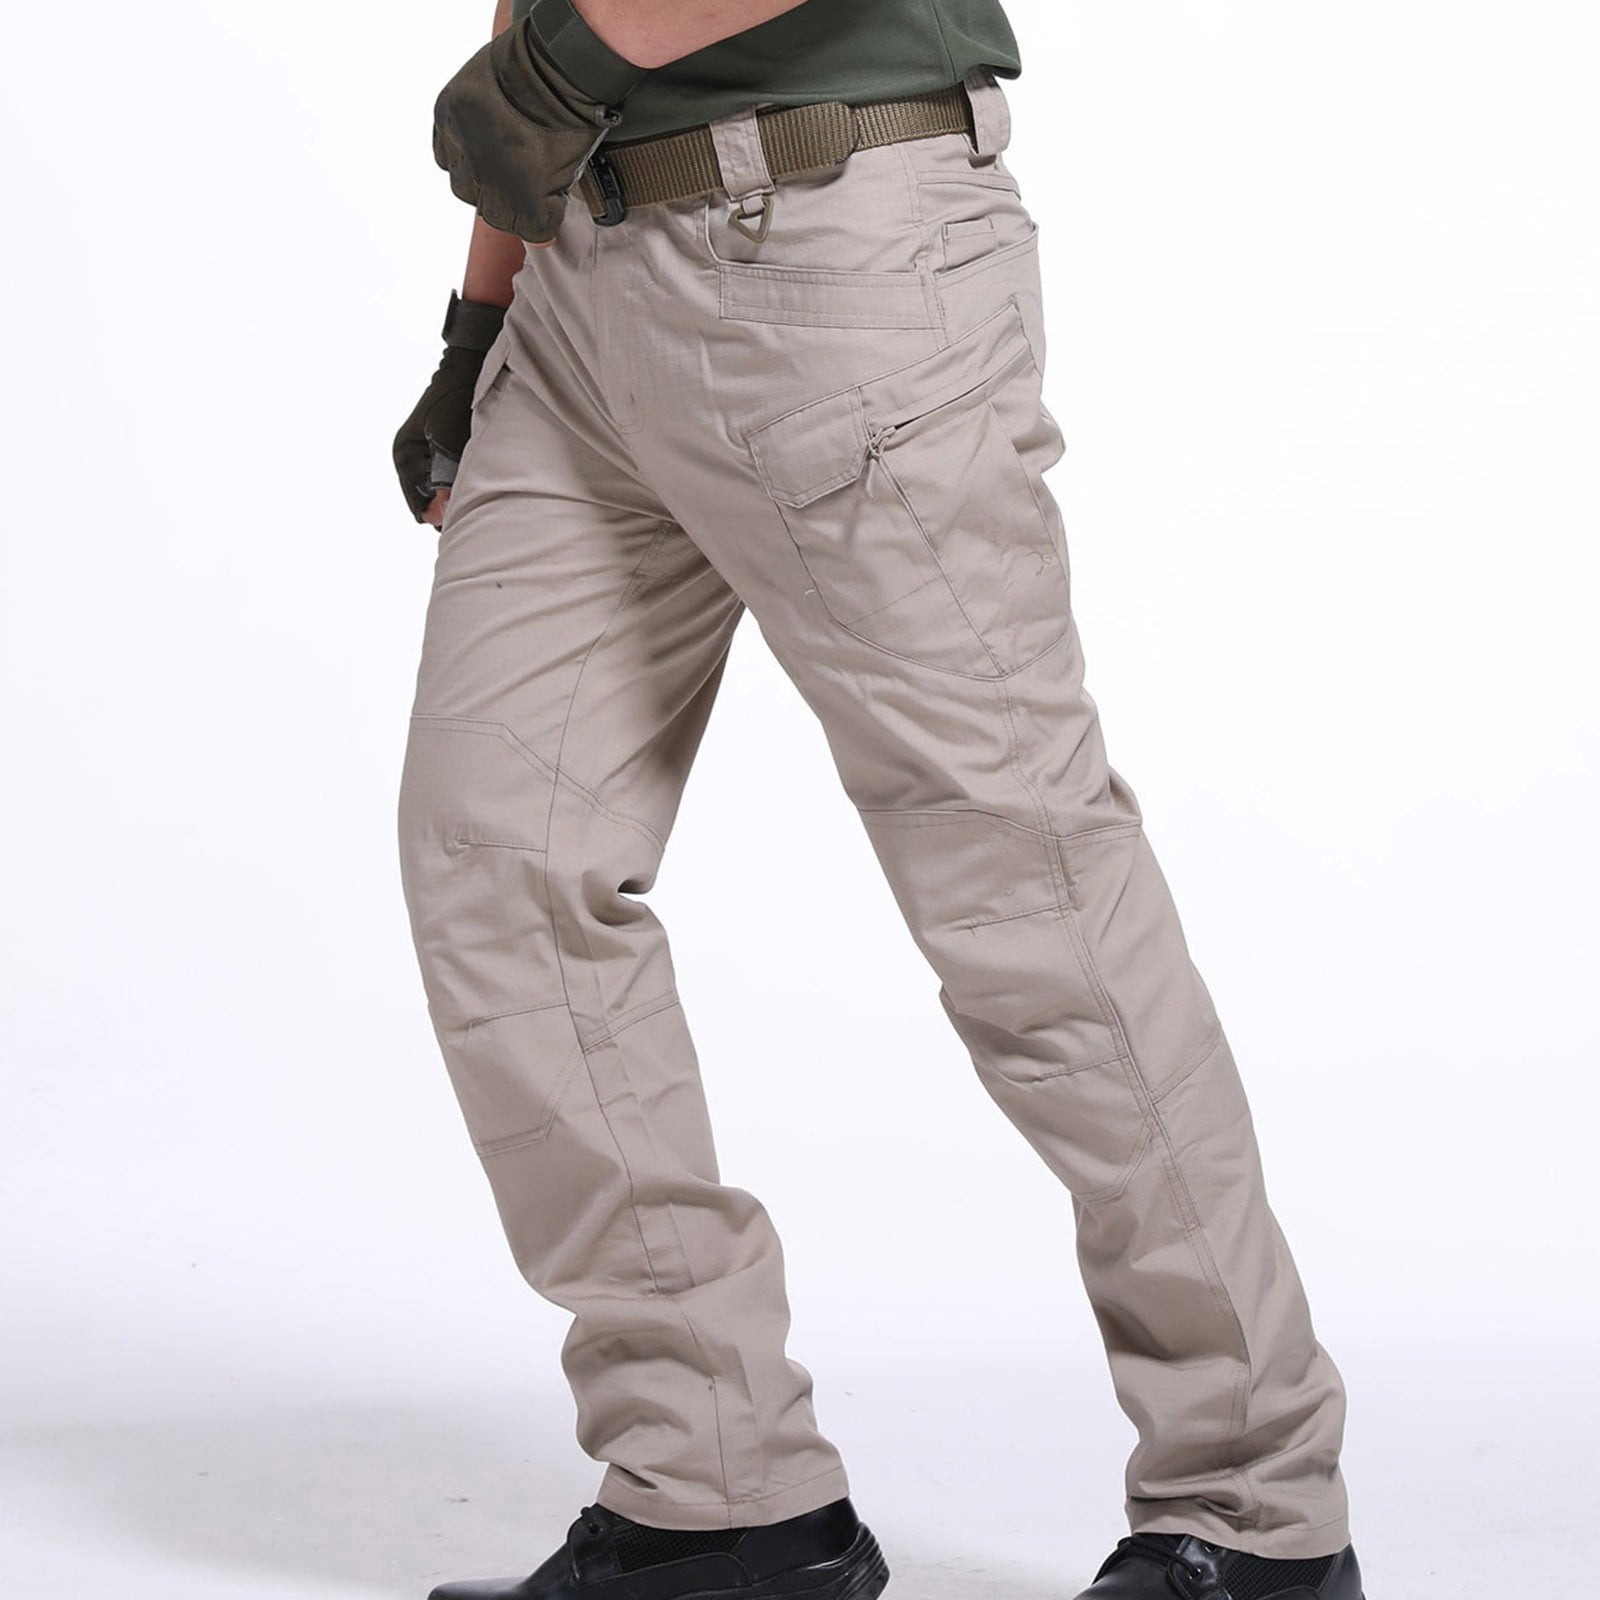 LIBRCLO Men's Cargo Pants with Pockets Casual Hiking Pants Dress Cargo ...